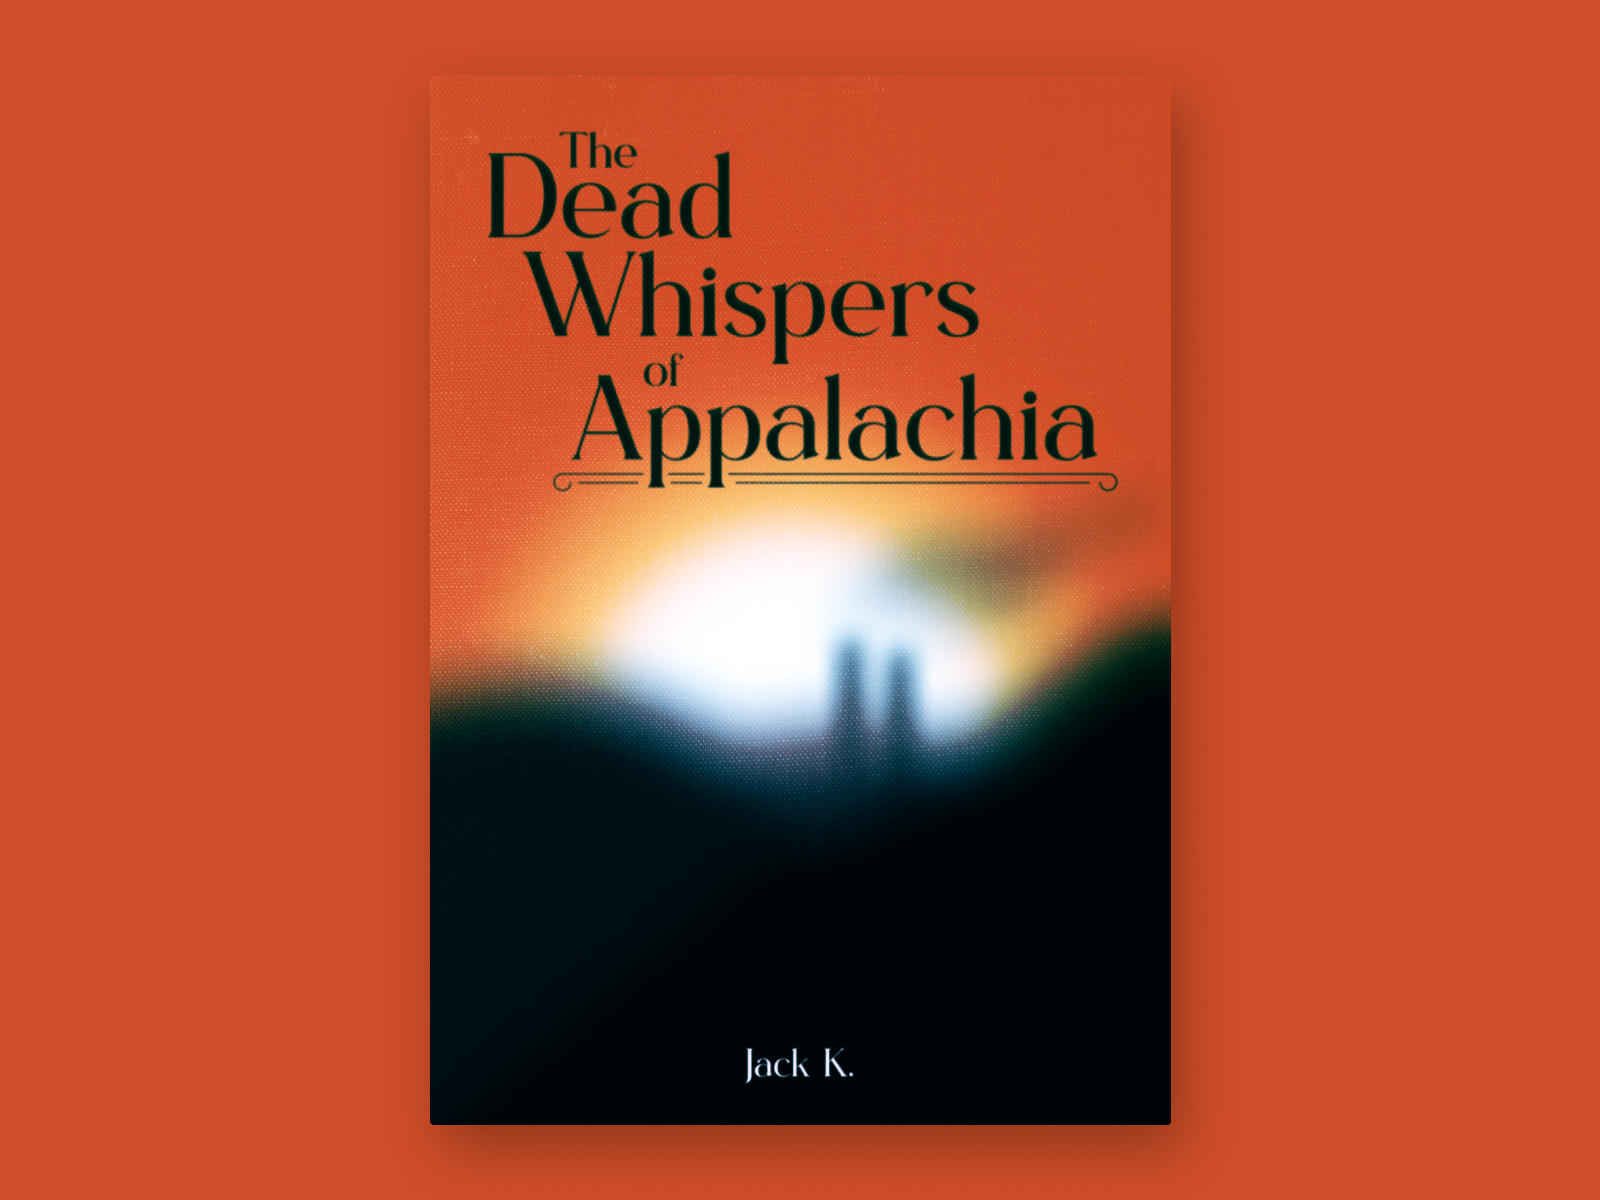 The Dead Whispers of Appalachia